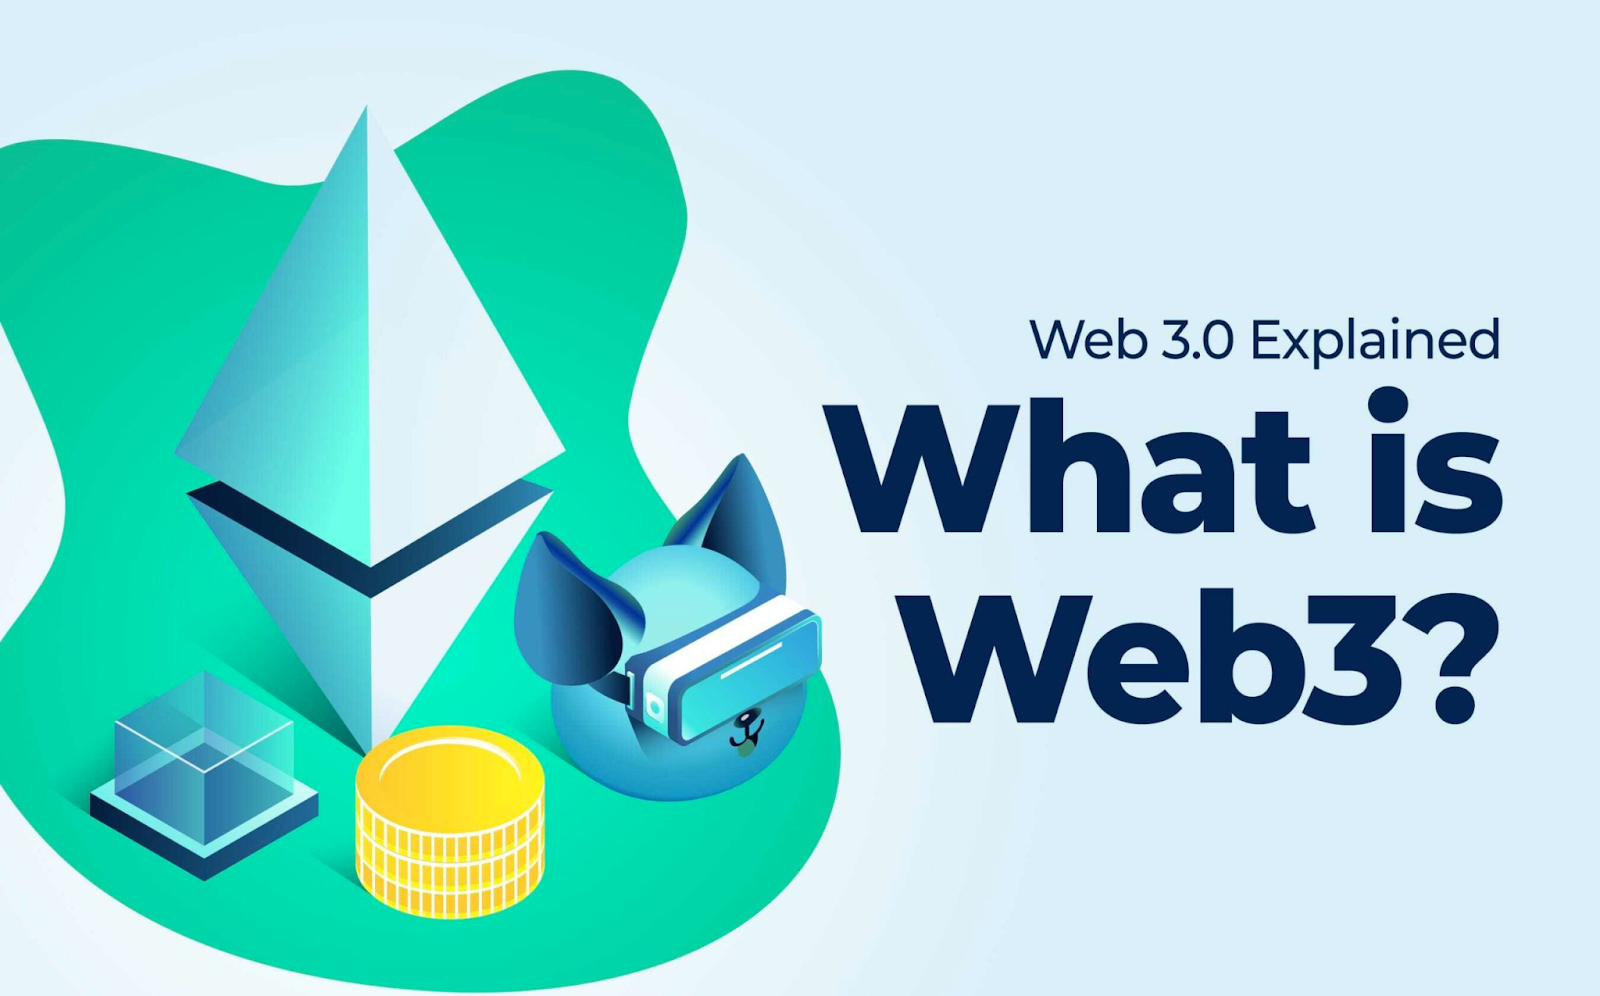 Web 3.0 explained - What is Web3, and how can it bear inflation?